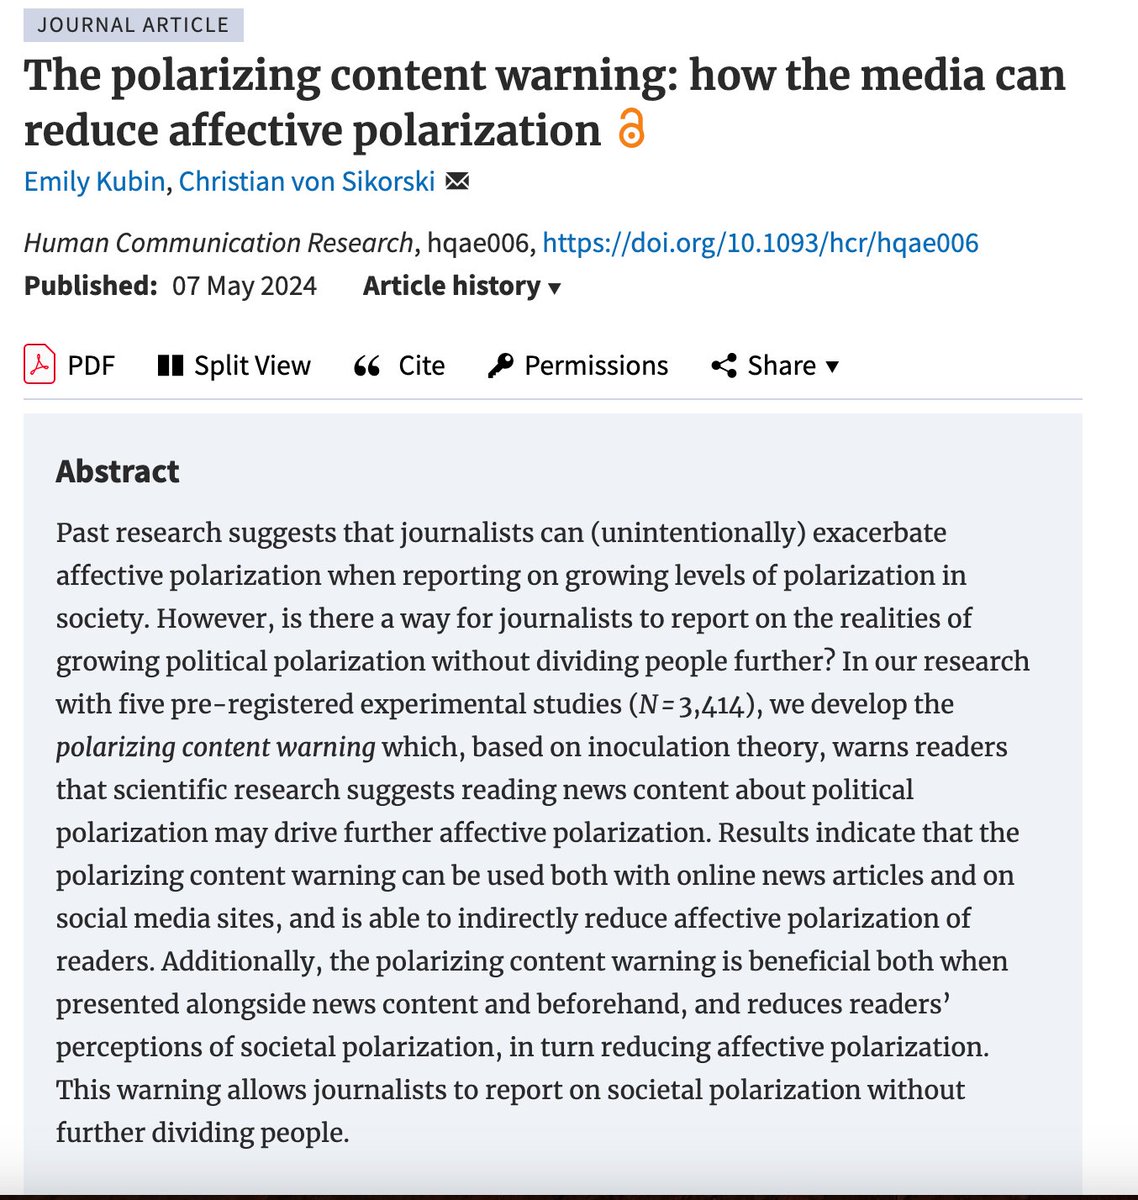 Now published online! Check out how we can inoculate media users against polarizing content as a way to indirectly reduce affective polarization 👇
academic.oup.com/hcr/advance-ar…